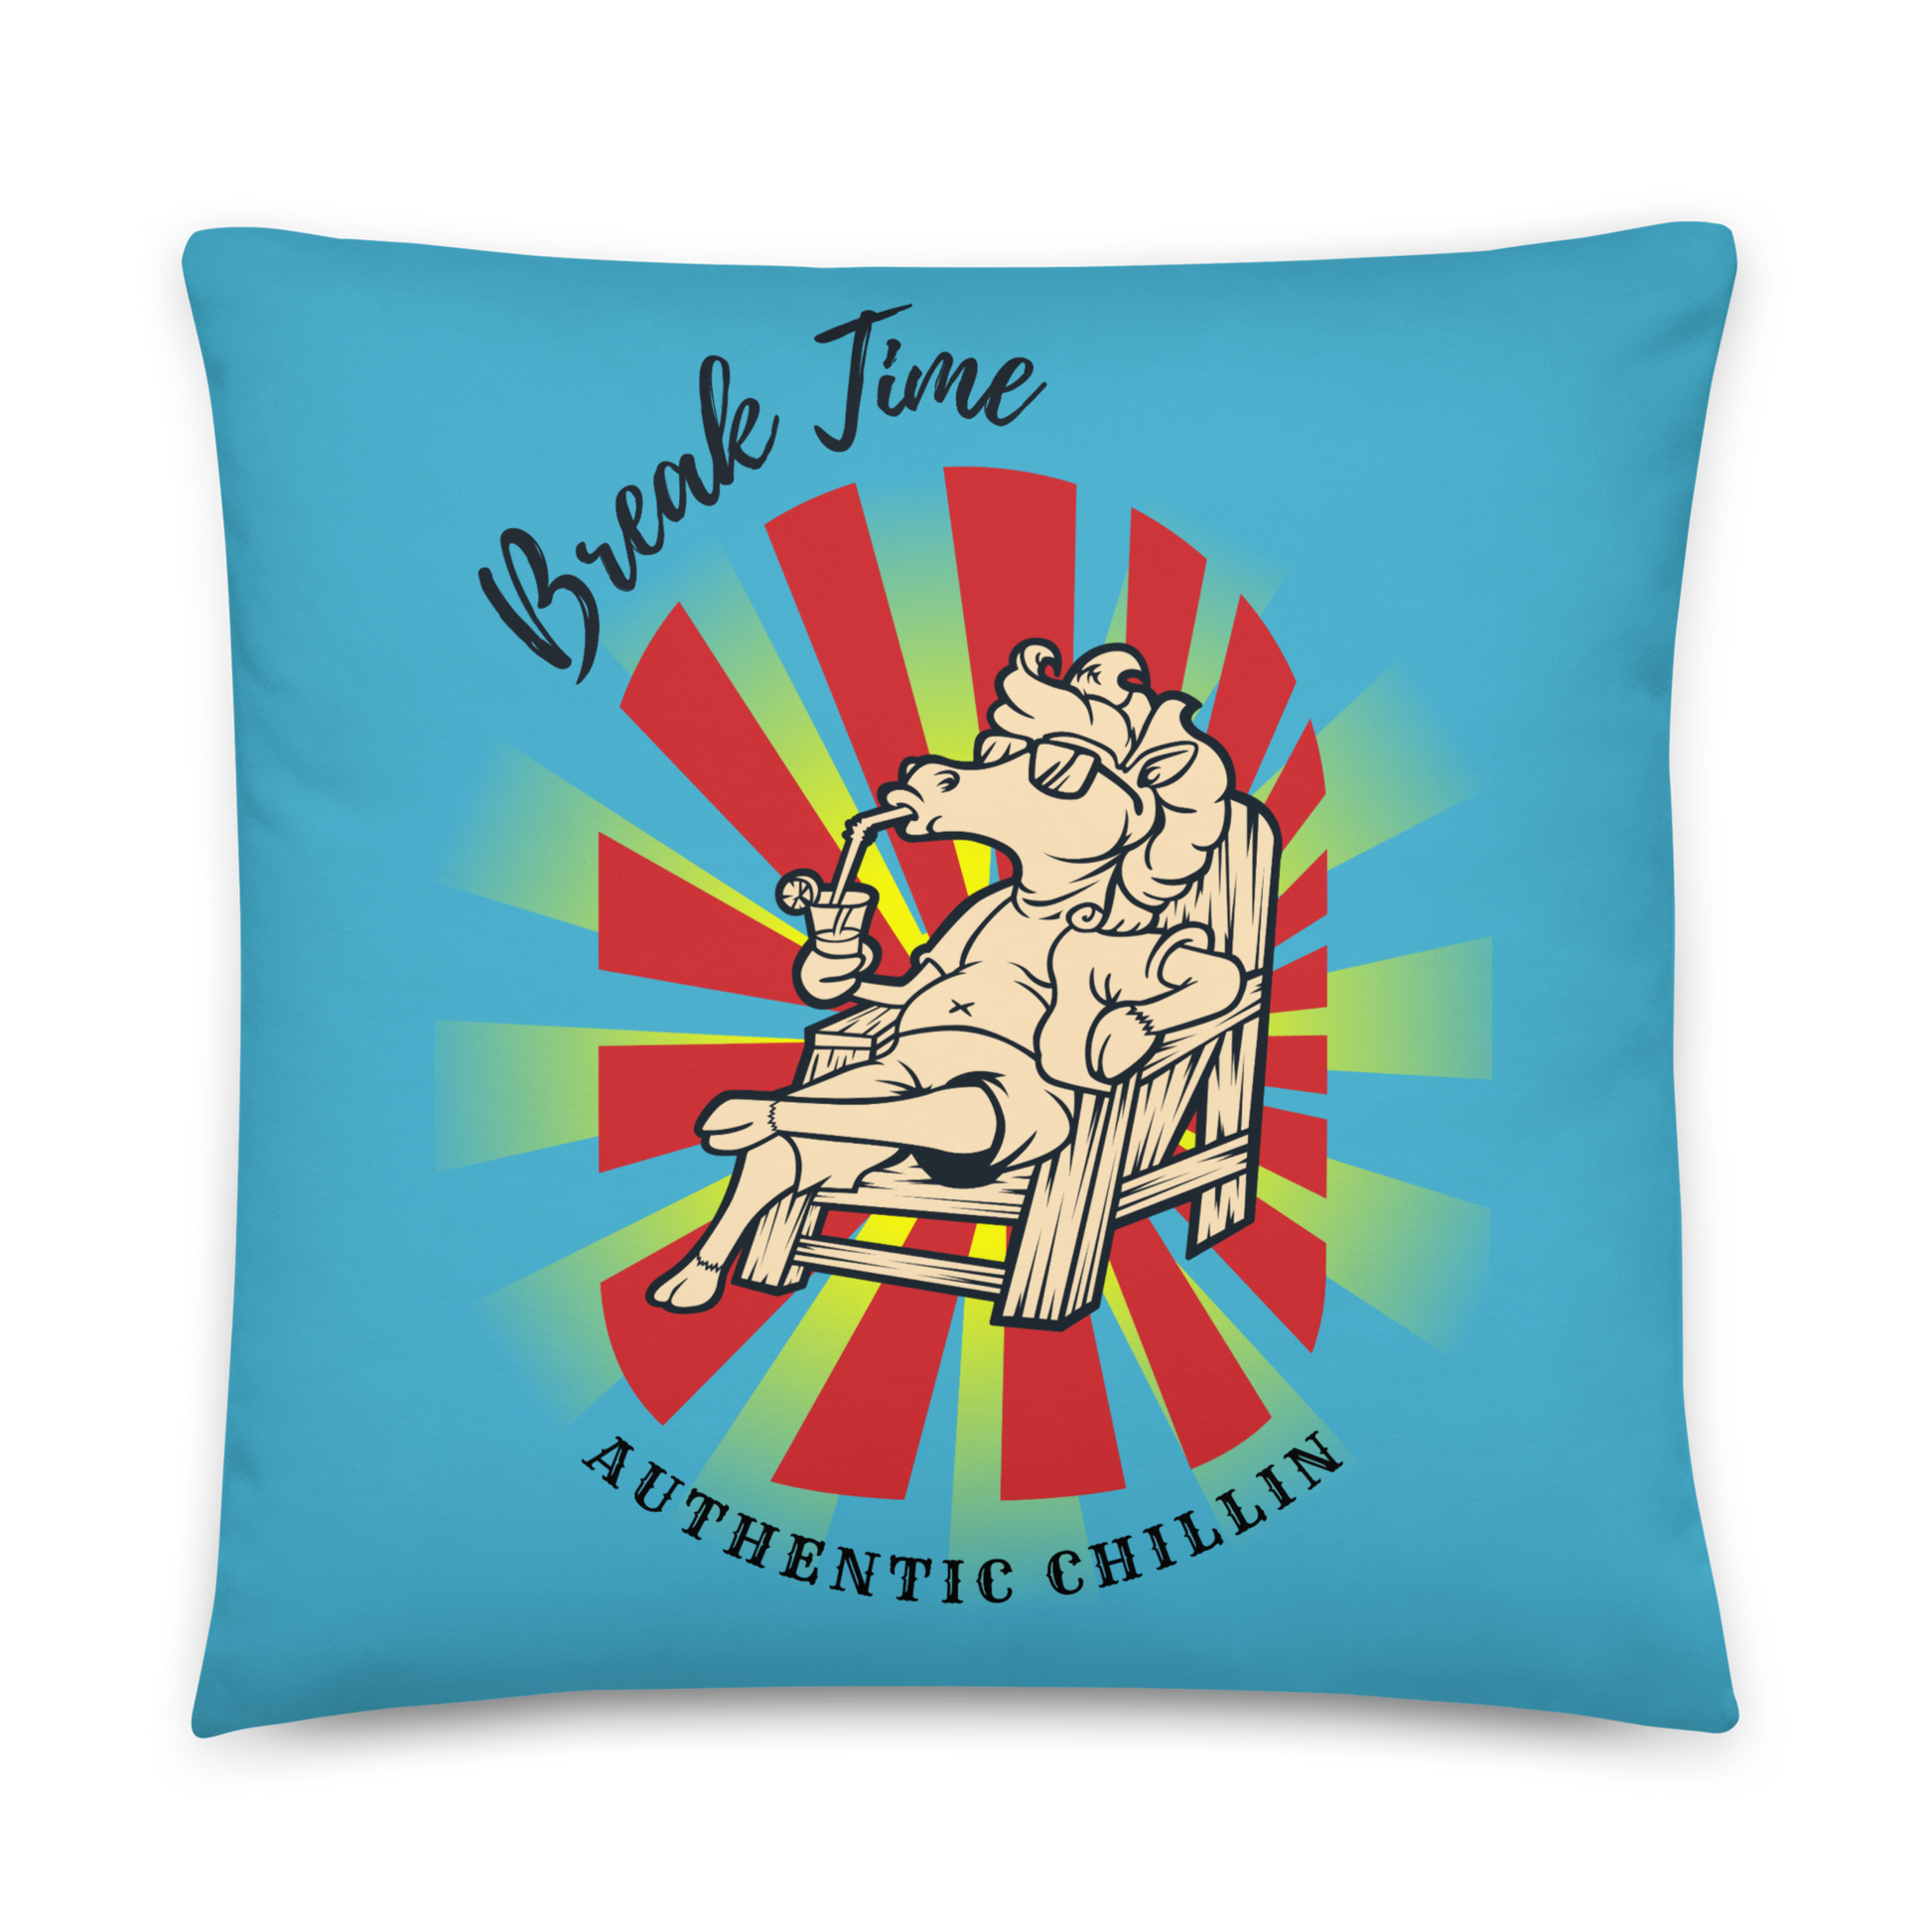 Hand Drawn Horse || Horse Square Throw Pillow - Design: "Break Time"; Static Design; Personalizable Text